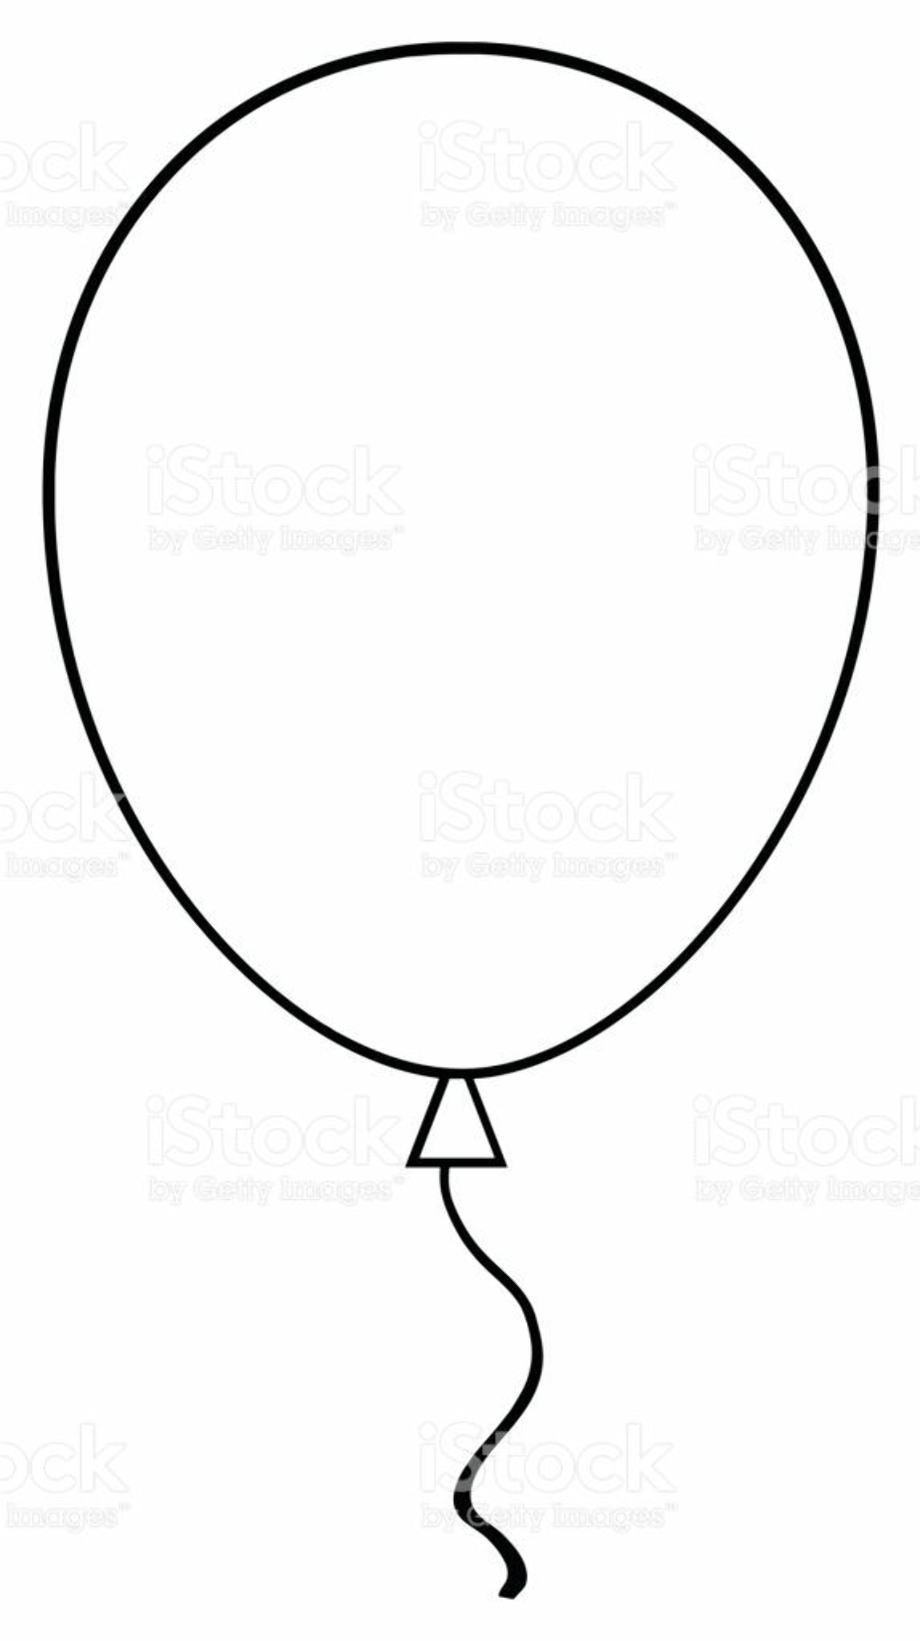 balloons clipart black and white